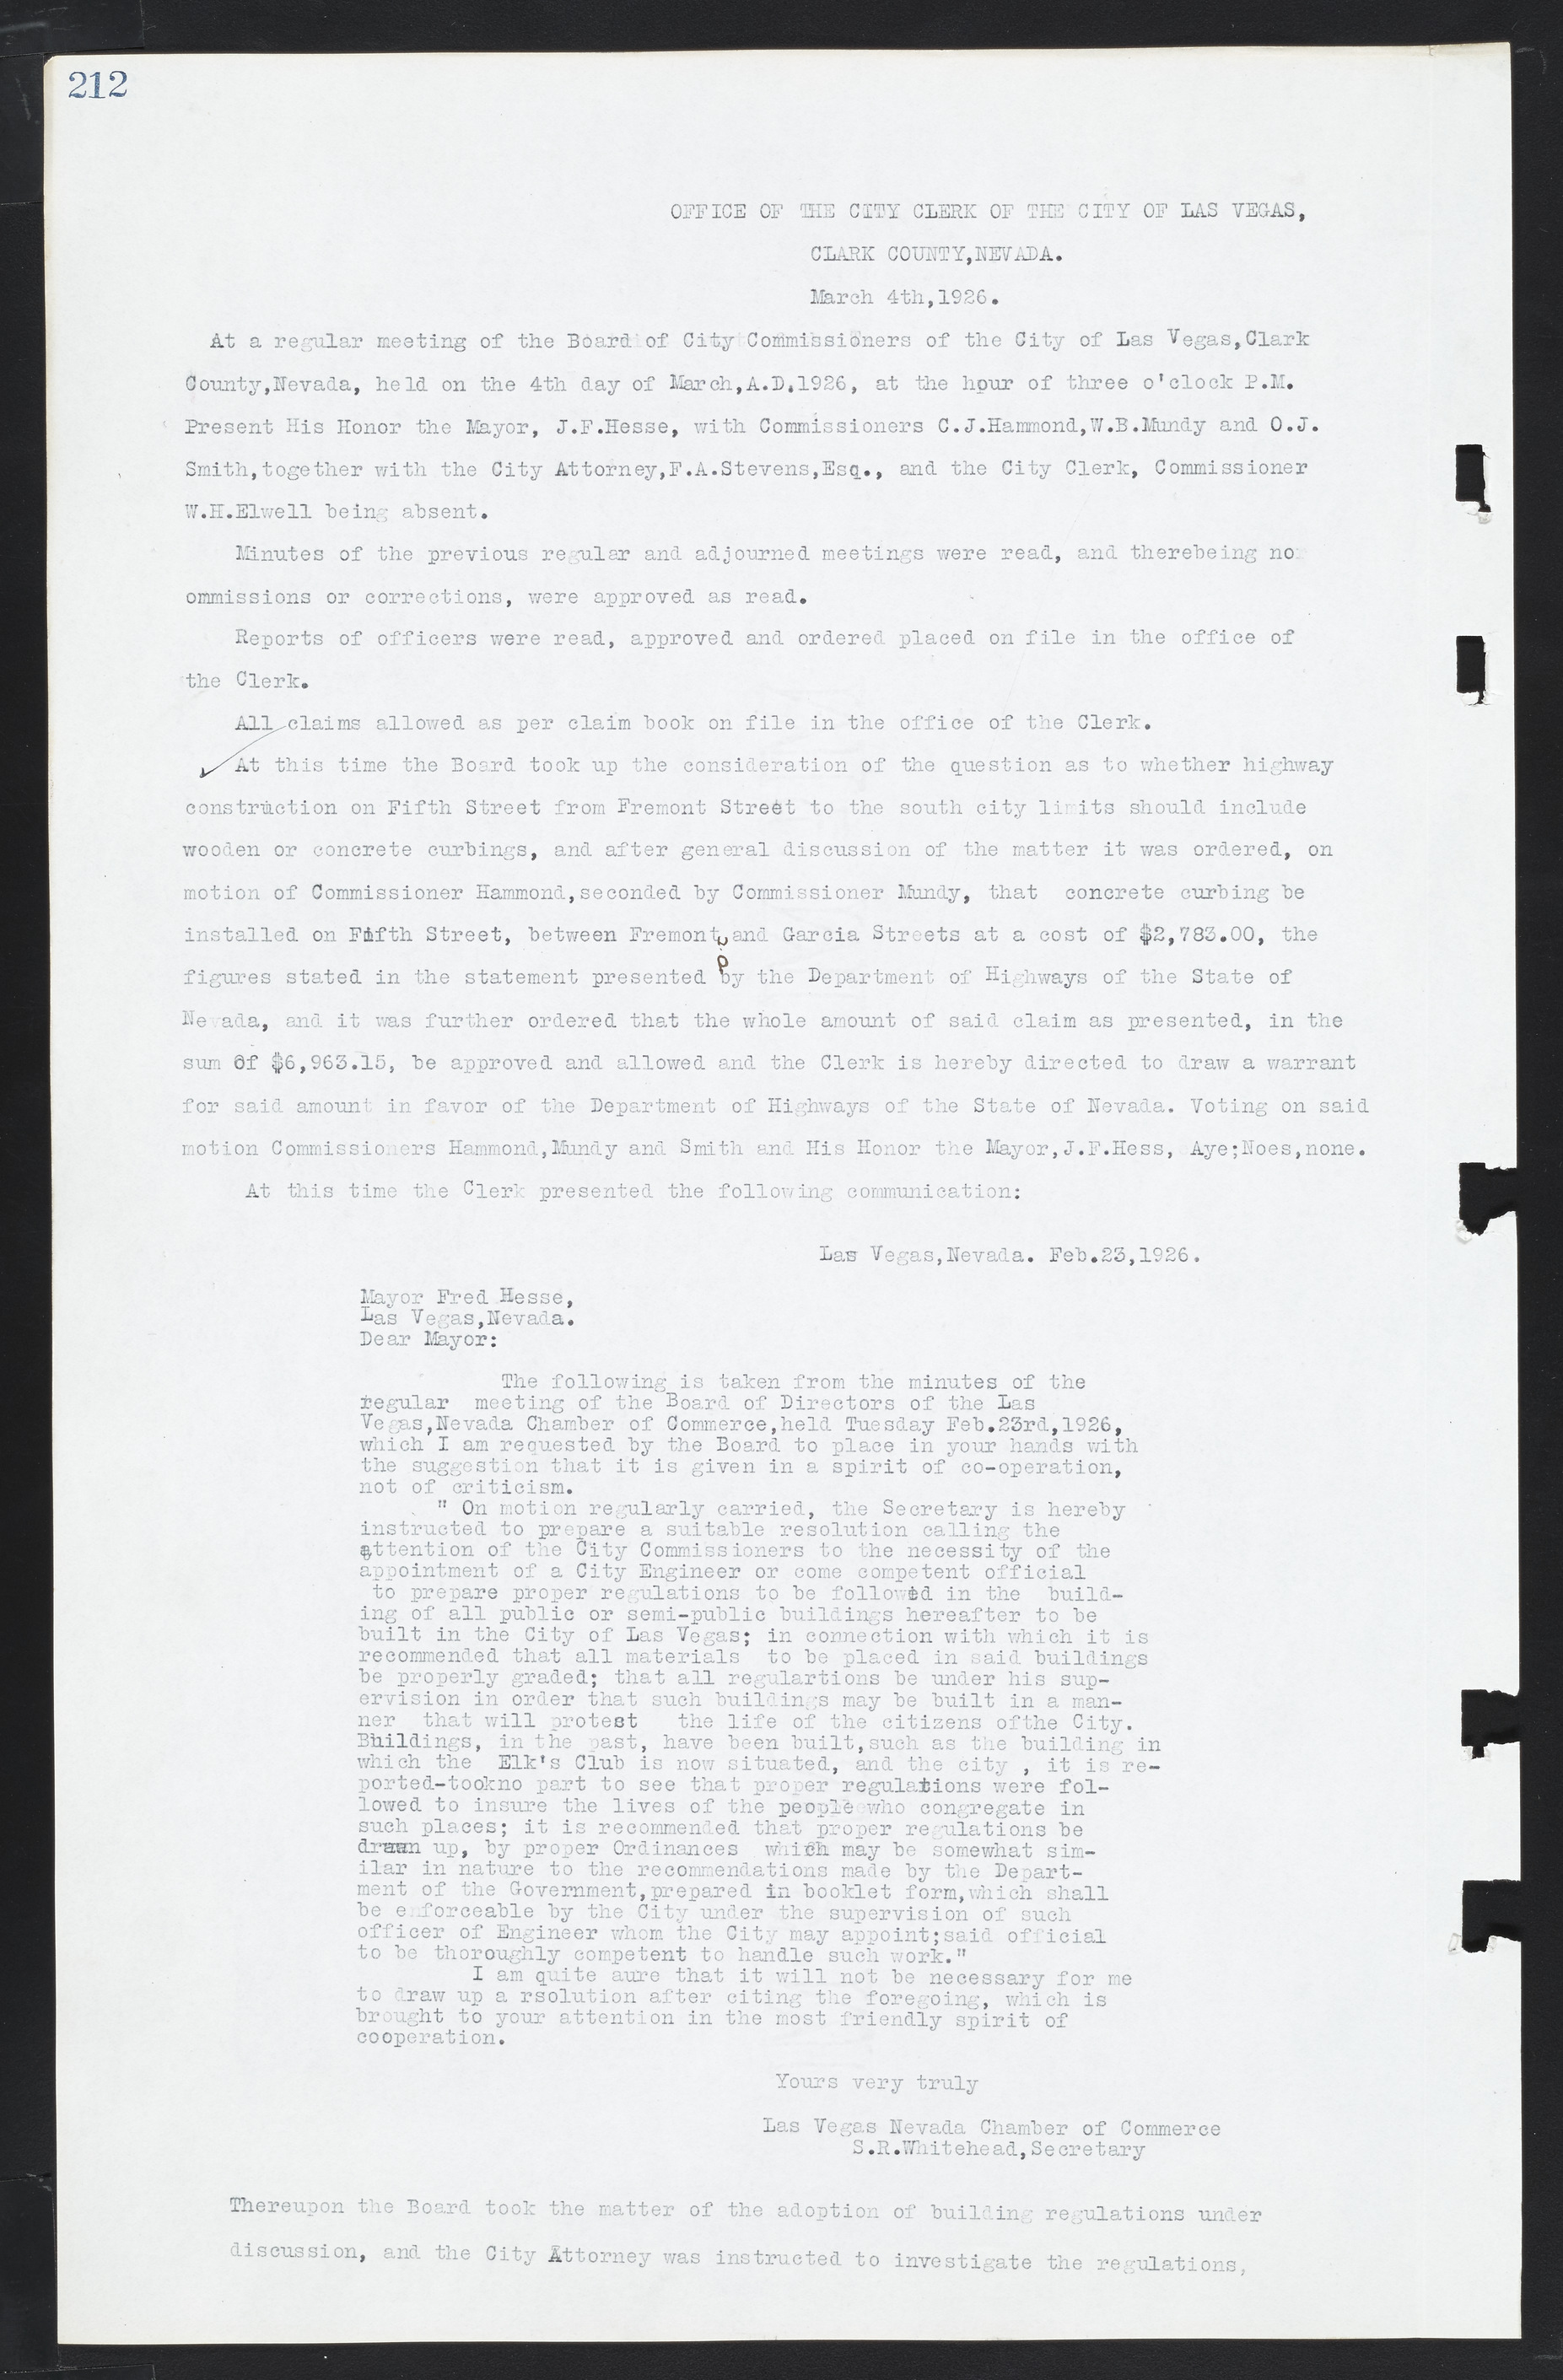 Las Vegas City Commission Minutes, March 1, 1922 to May 10, 1929, lvc000002-219